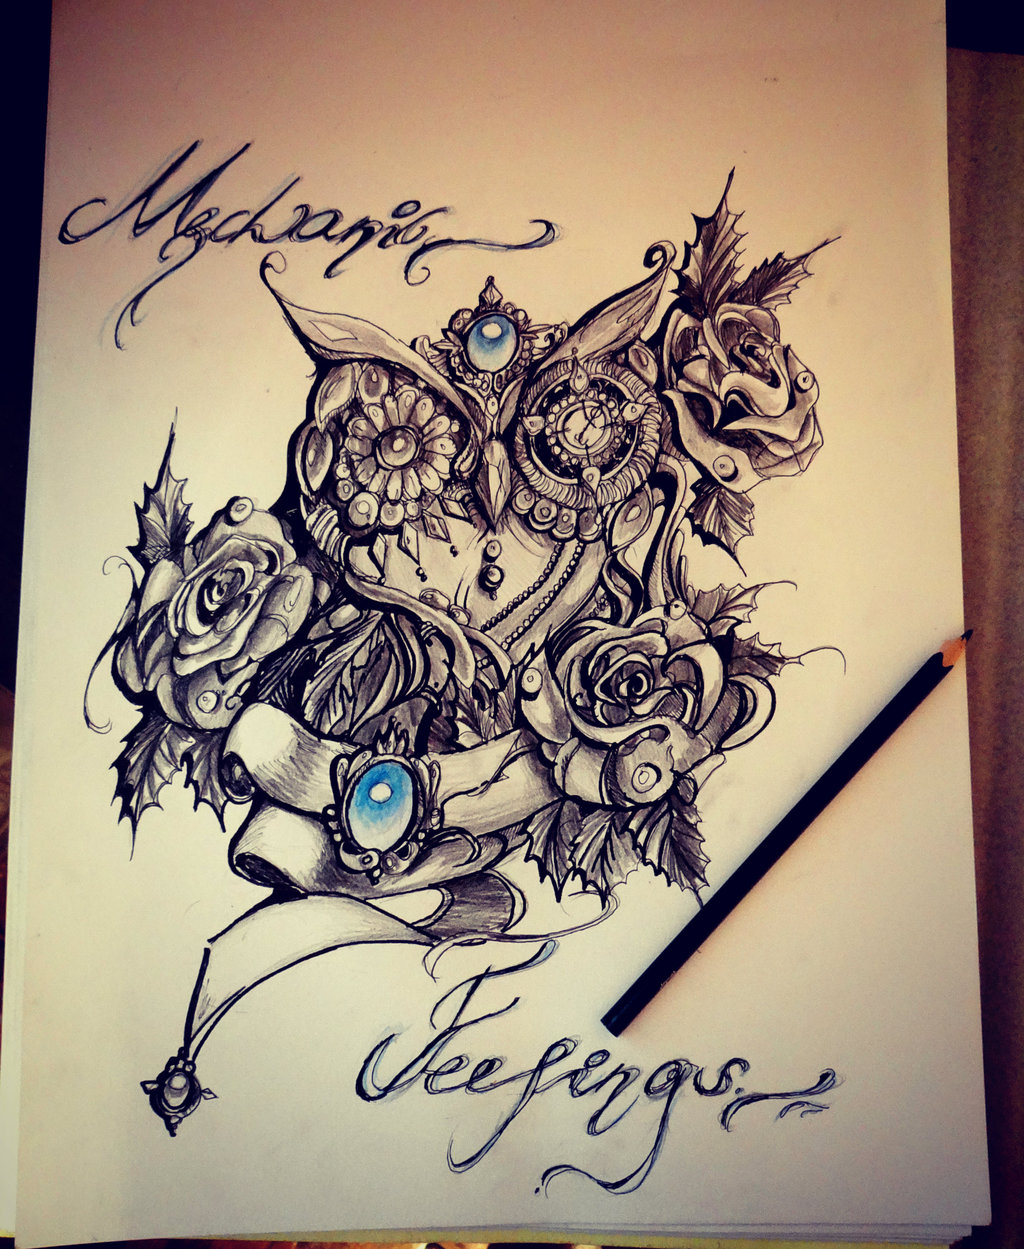 Unique blak-and-white owl with roses and blue gems tattoo design by Shitachi